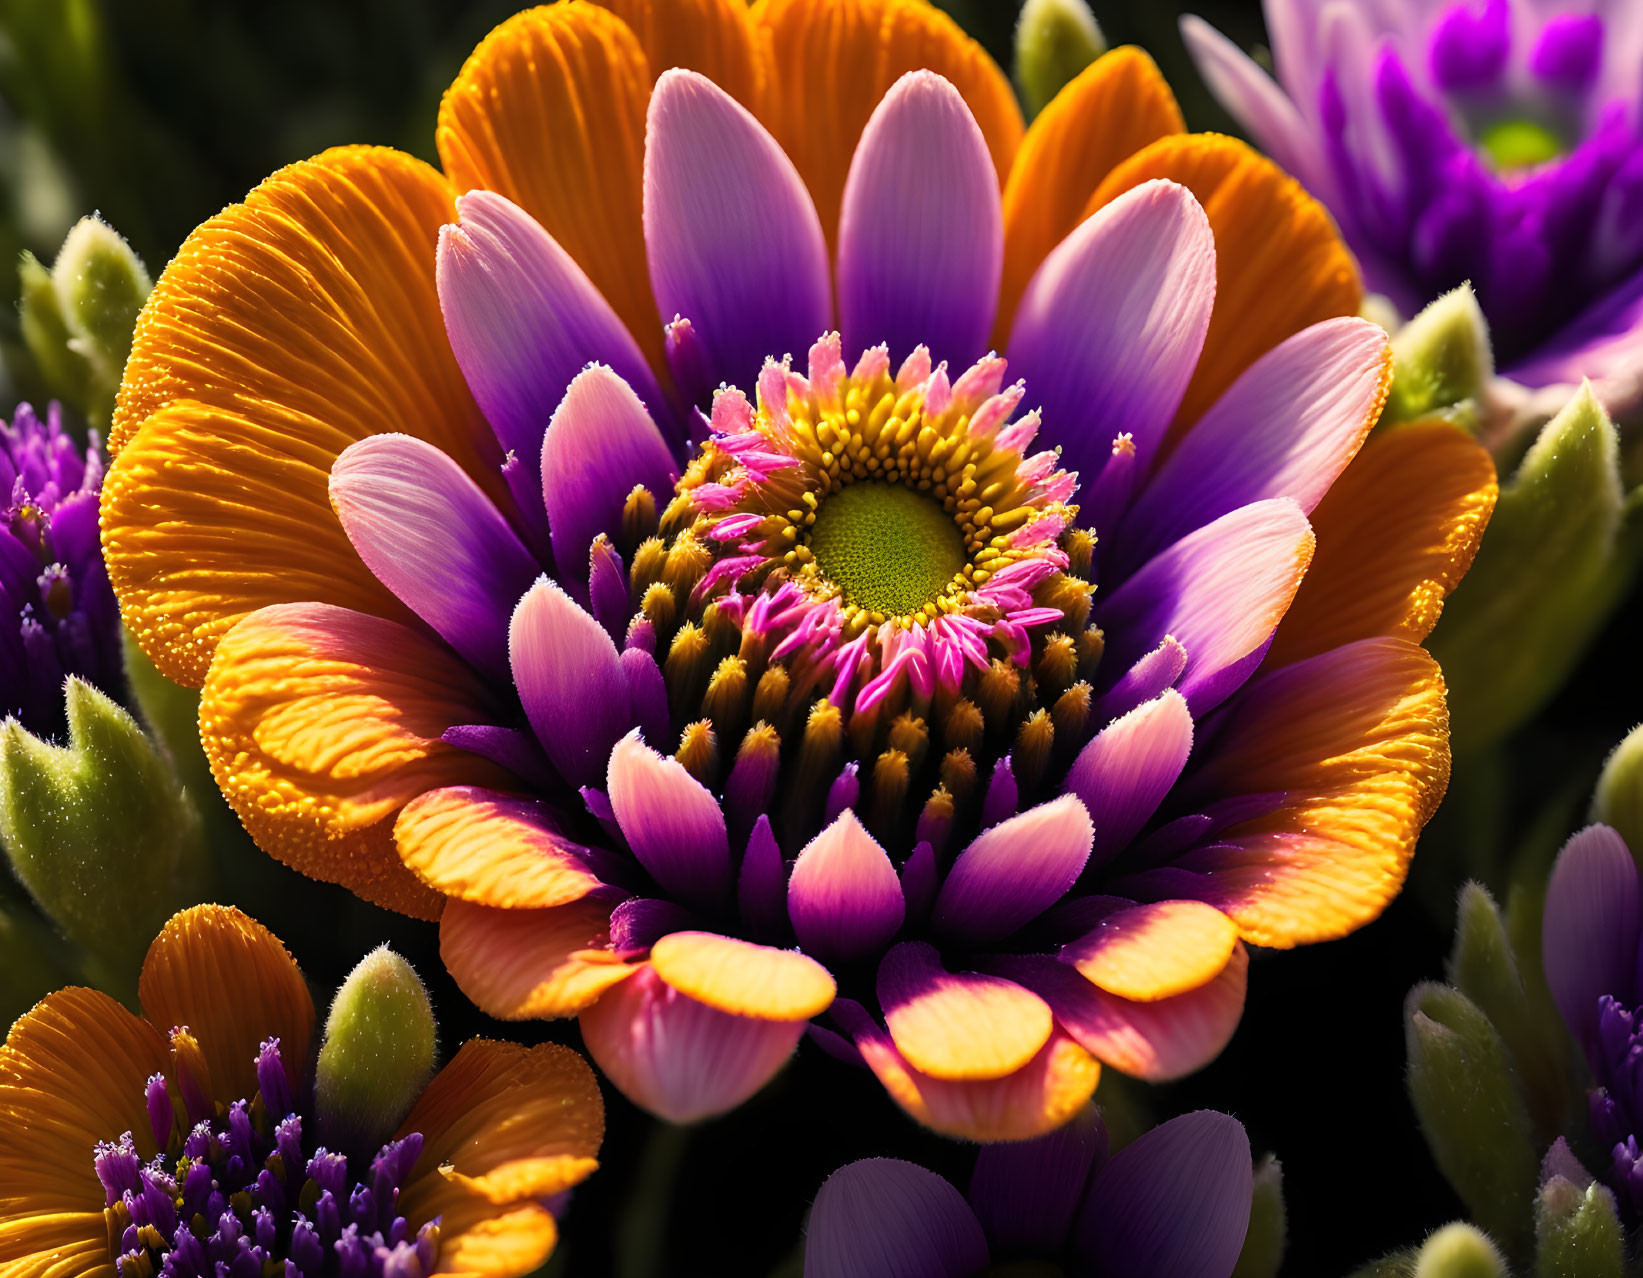 Detailed close-up of vibrant purple and orange flower with yellow center and greenery.